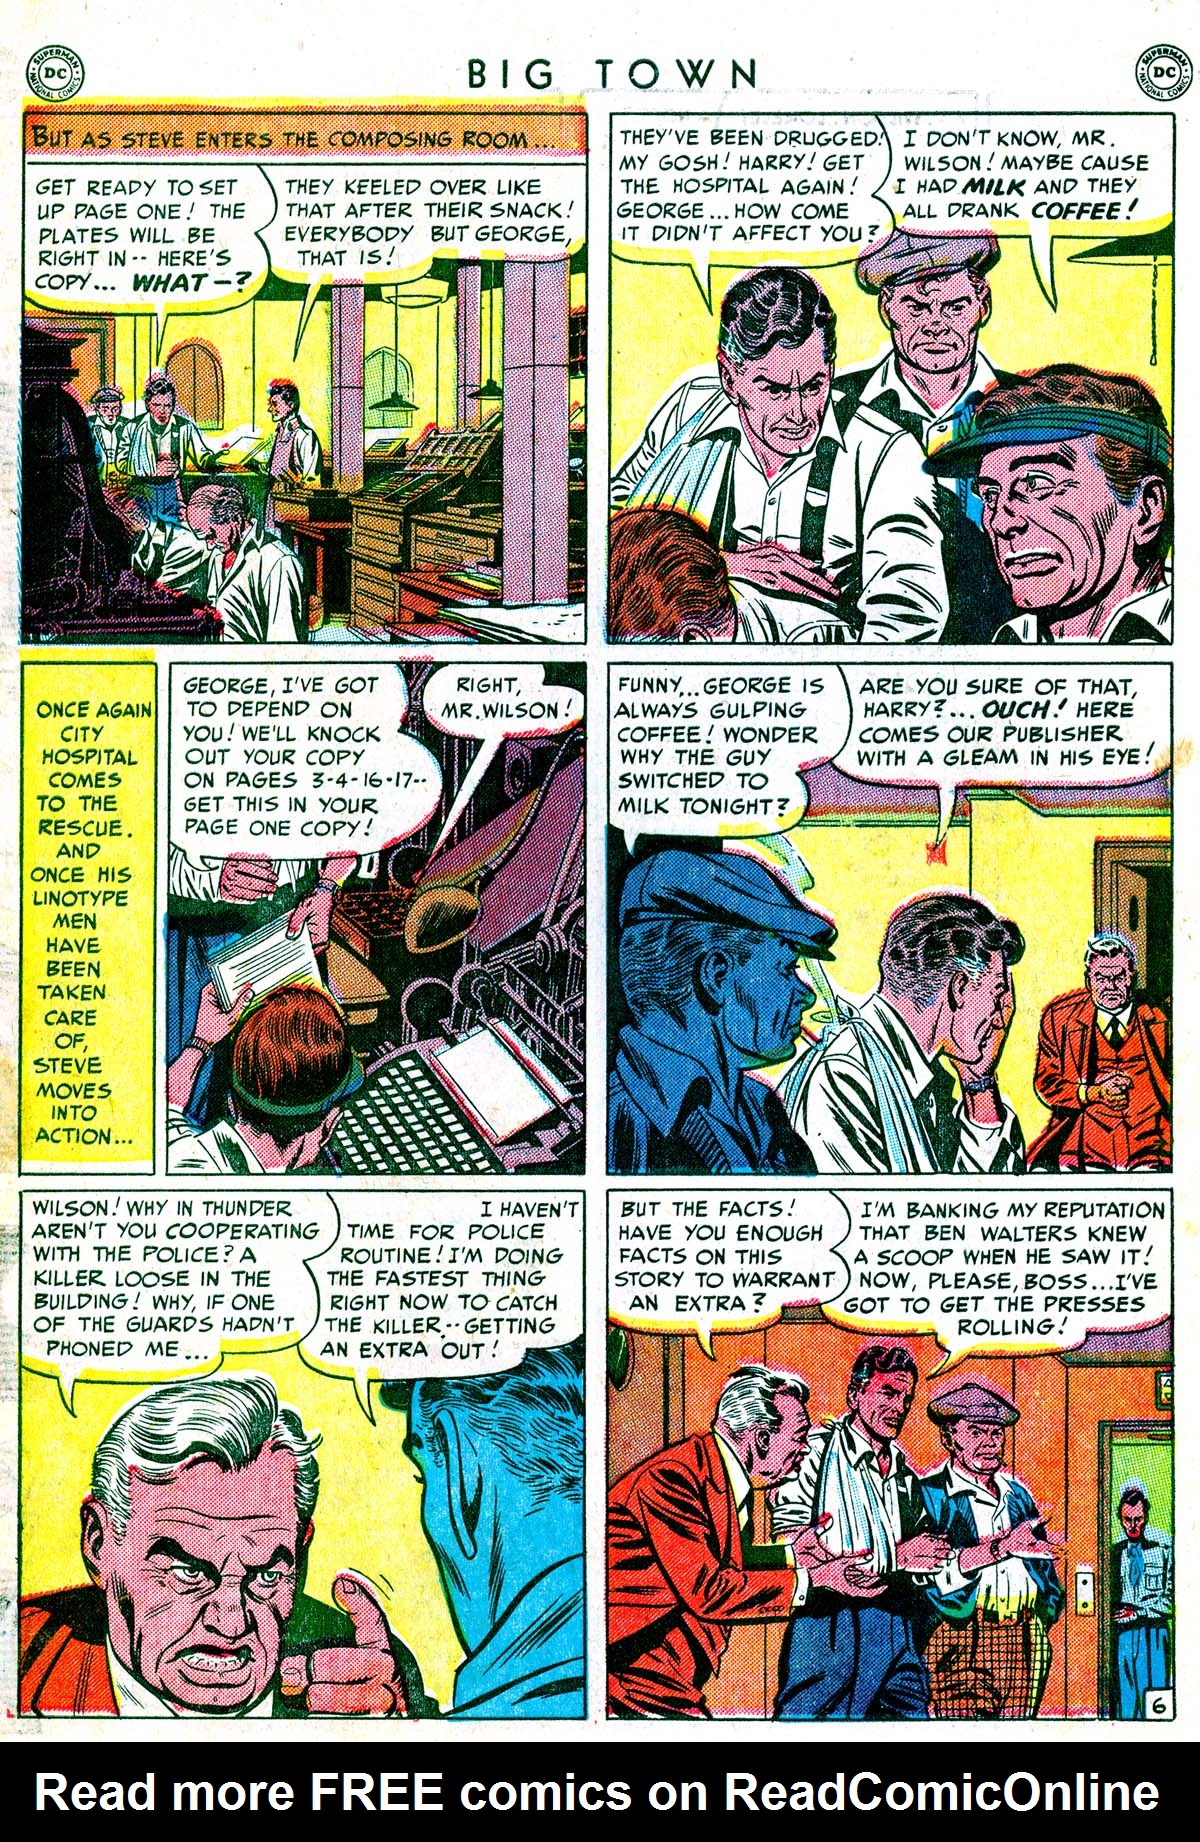 Big Town (1951) 1 Page 7